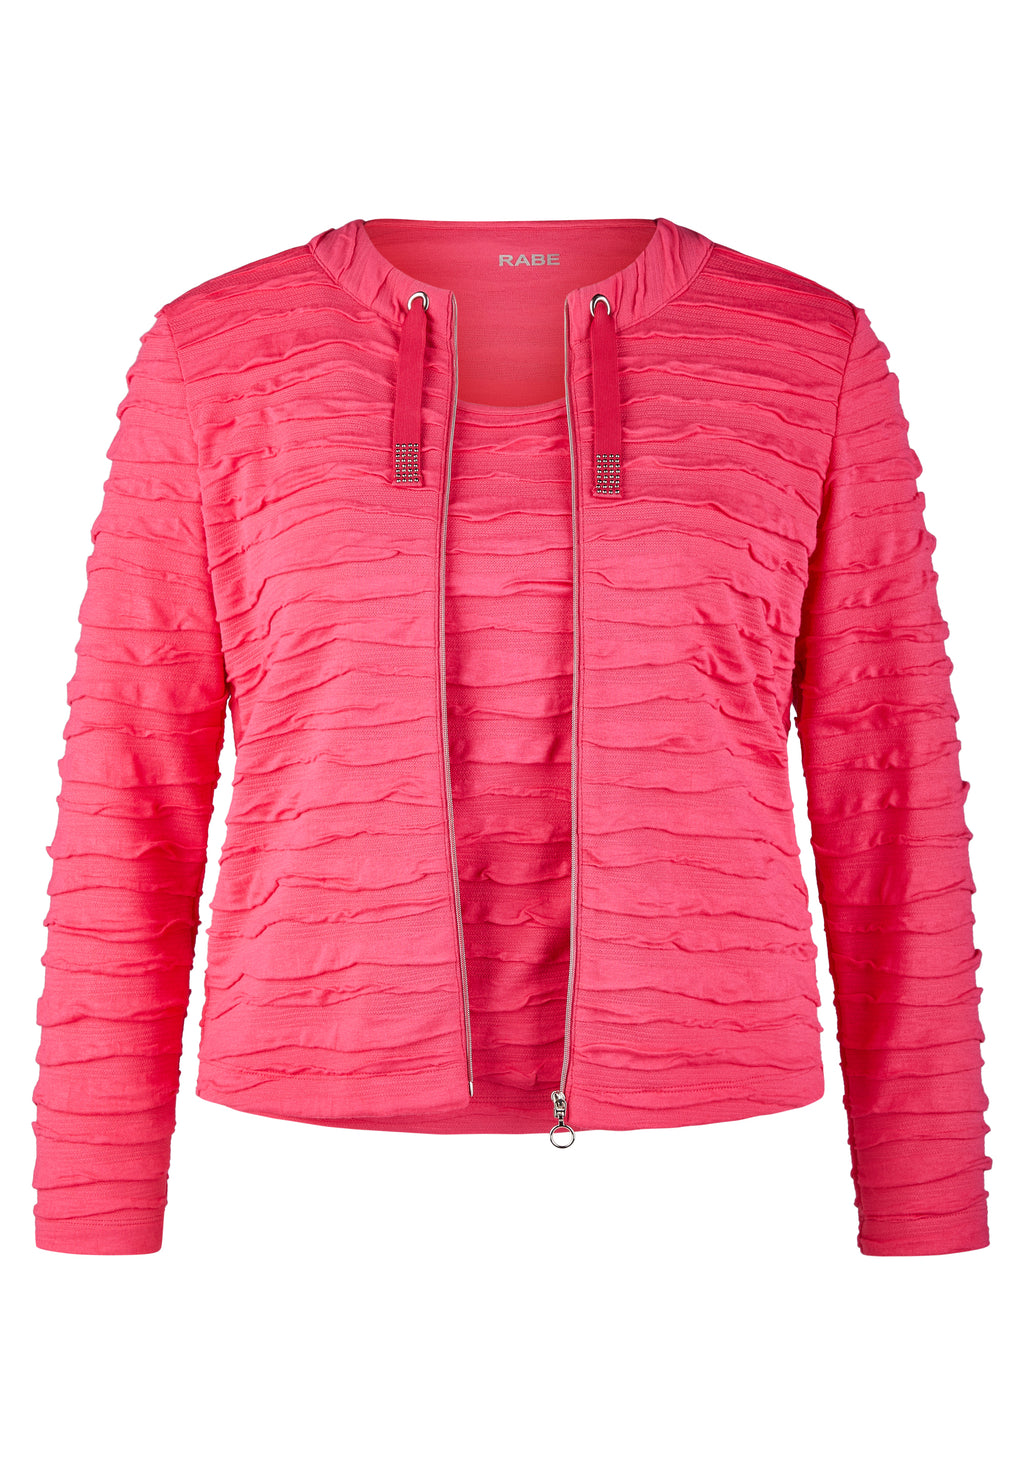 Rabe blossom up collection textured zip up jacket and tshirt twin set in pink, product code 52-122261